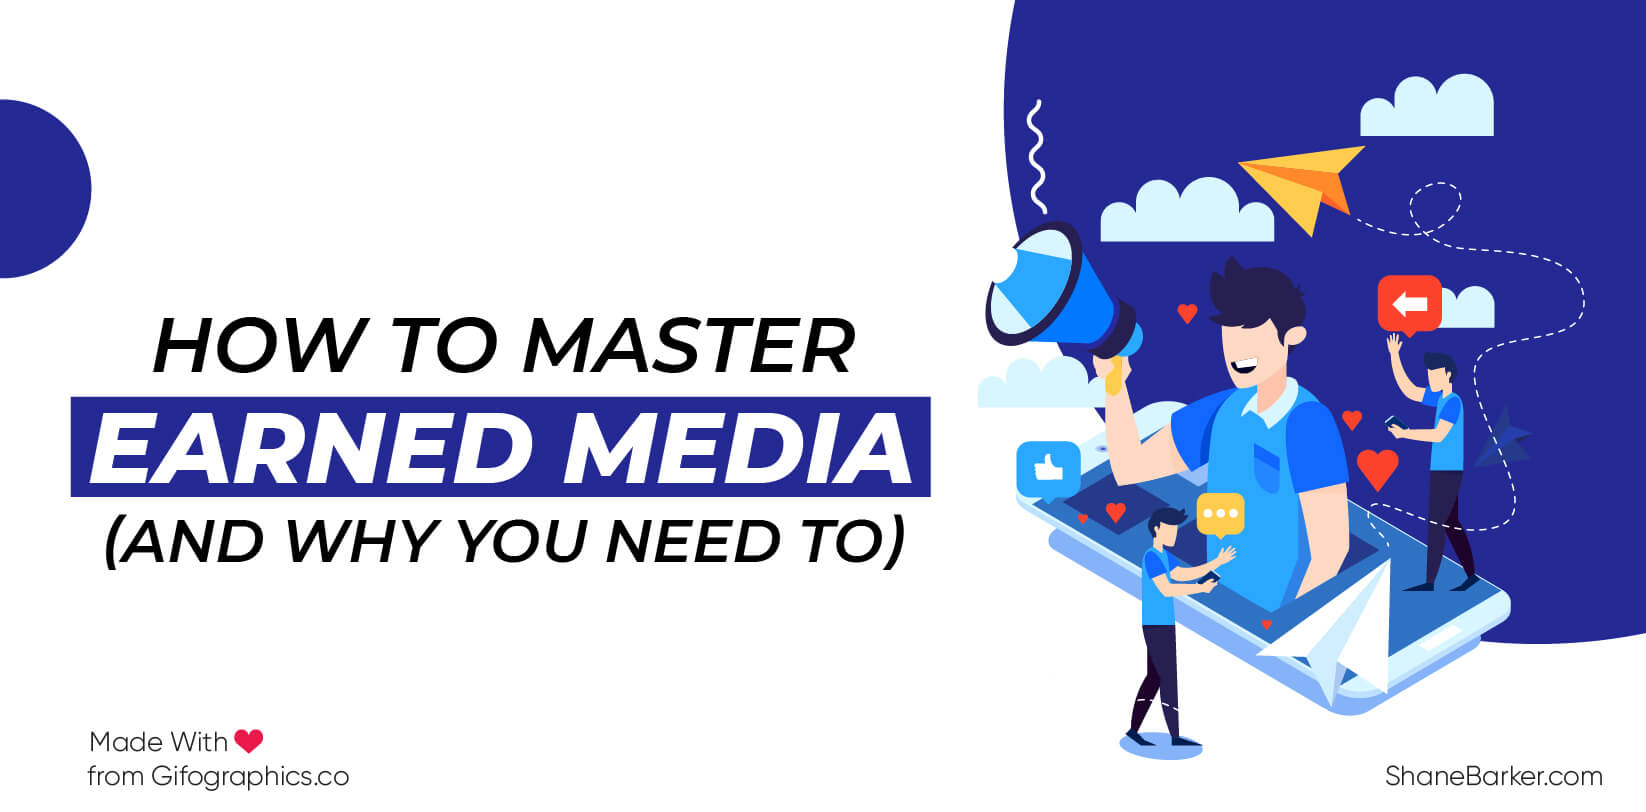 how to master earned media (and why you need to)